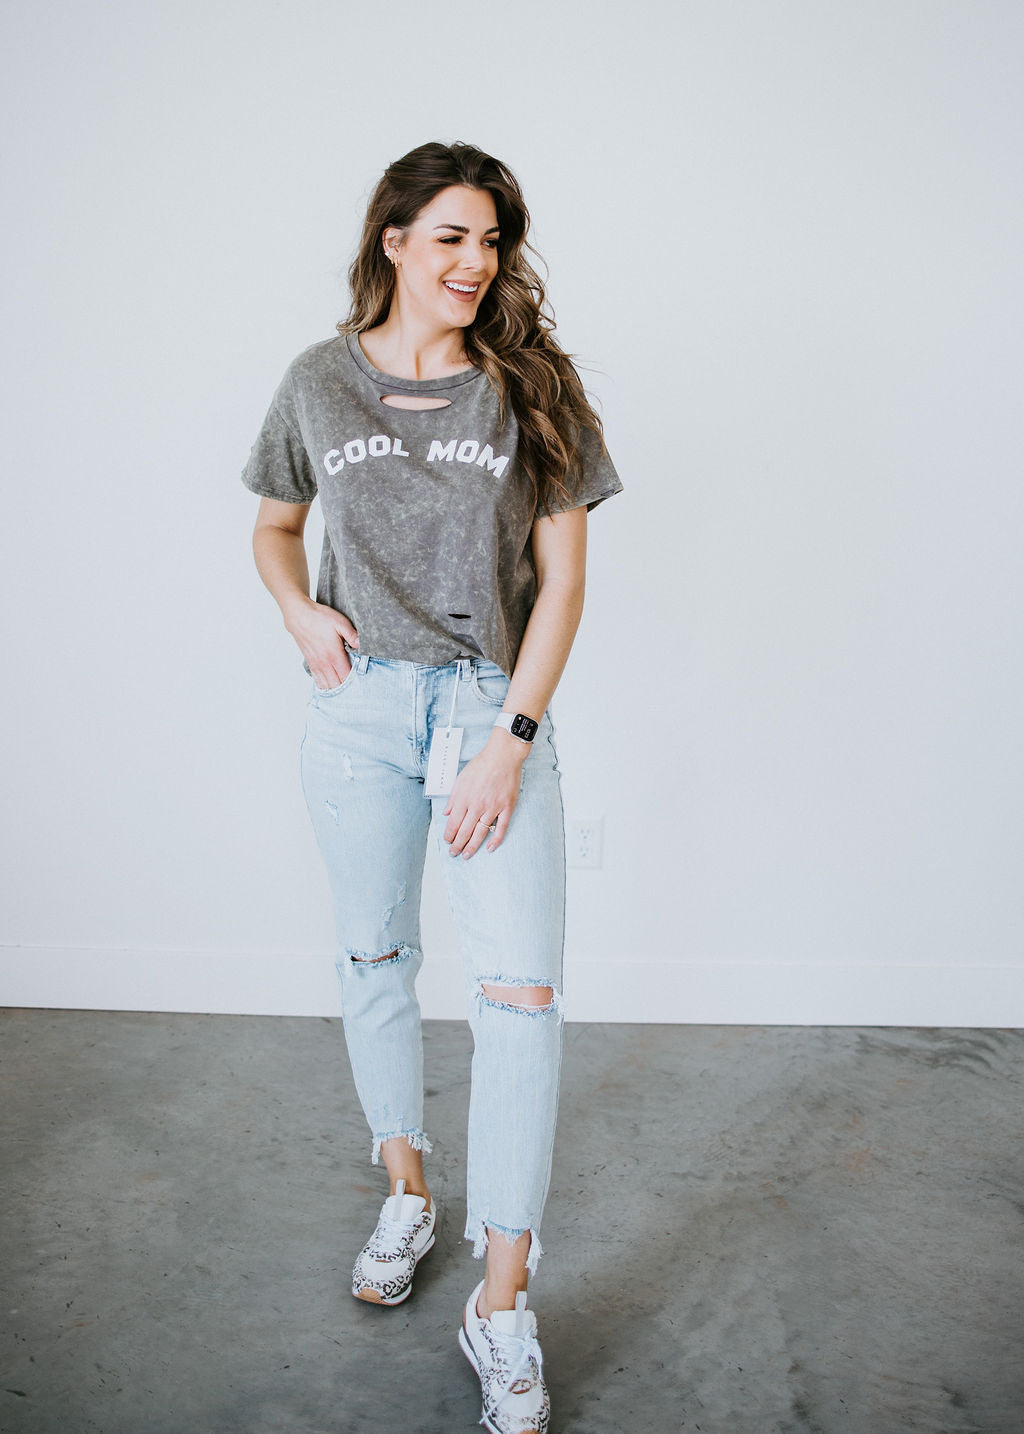 Cool Mom Mineral Washed Tee